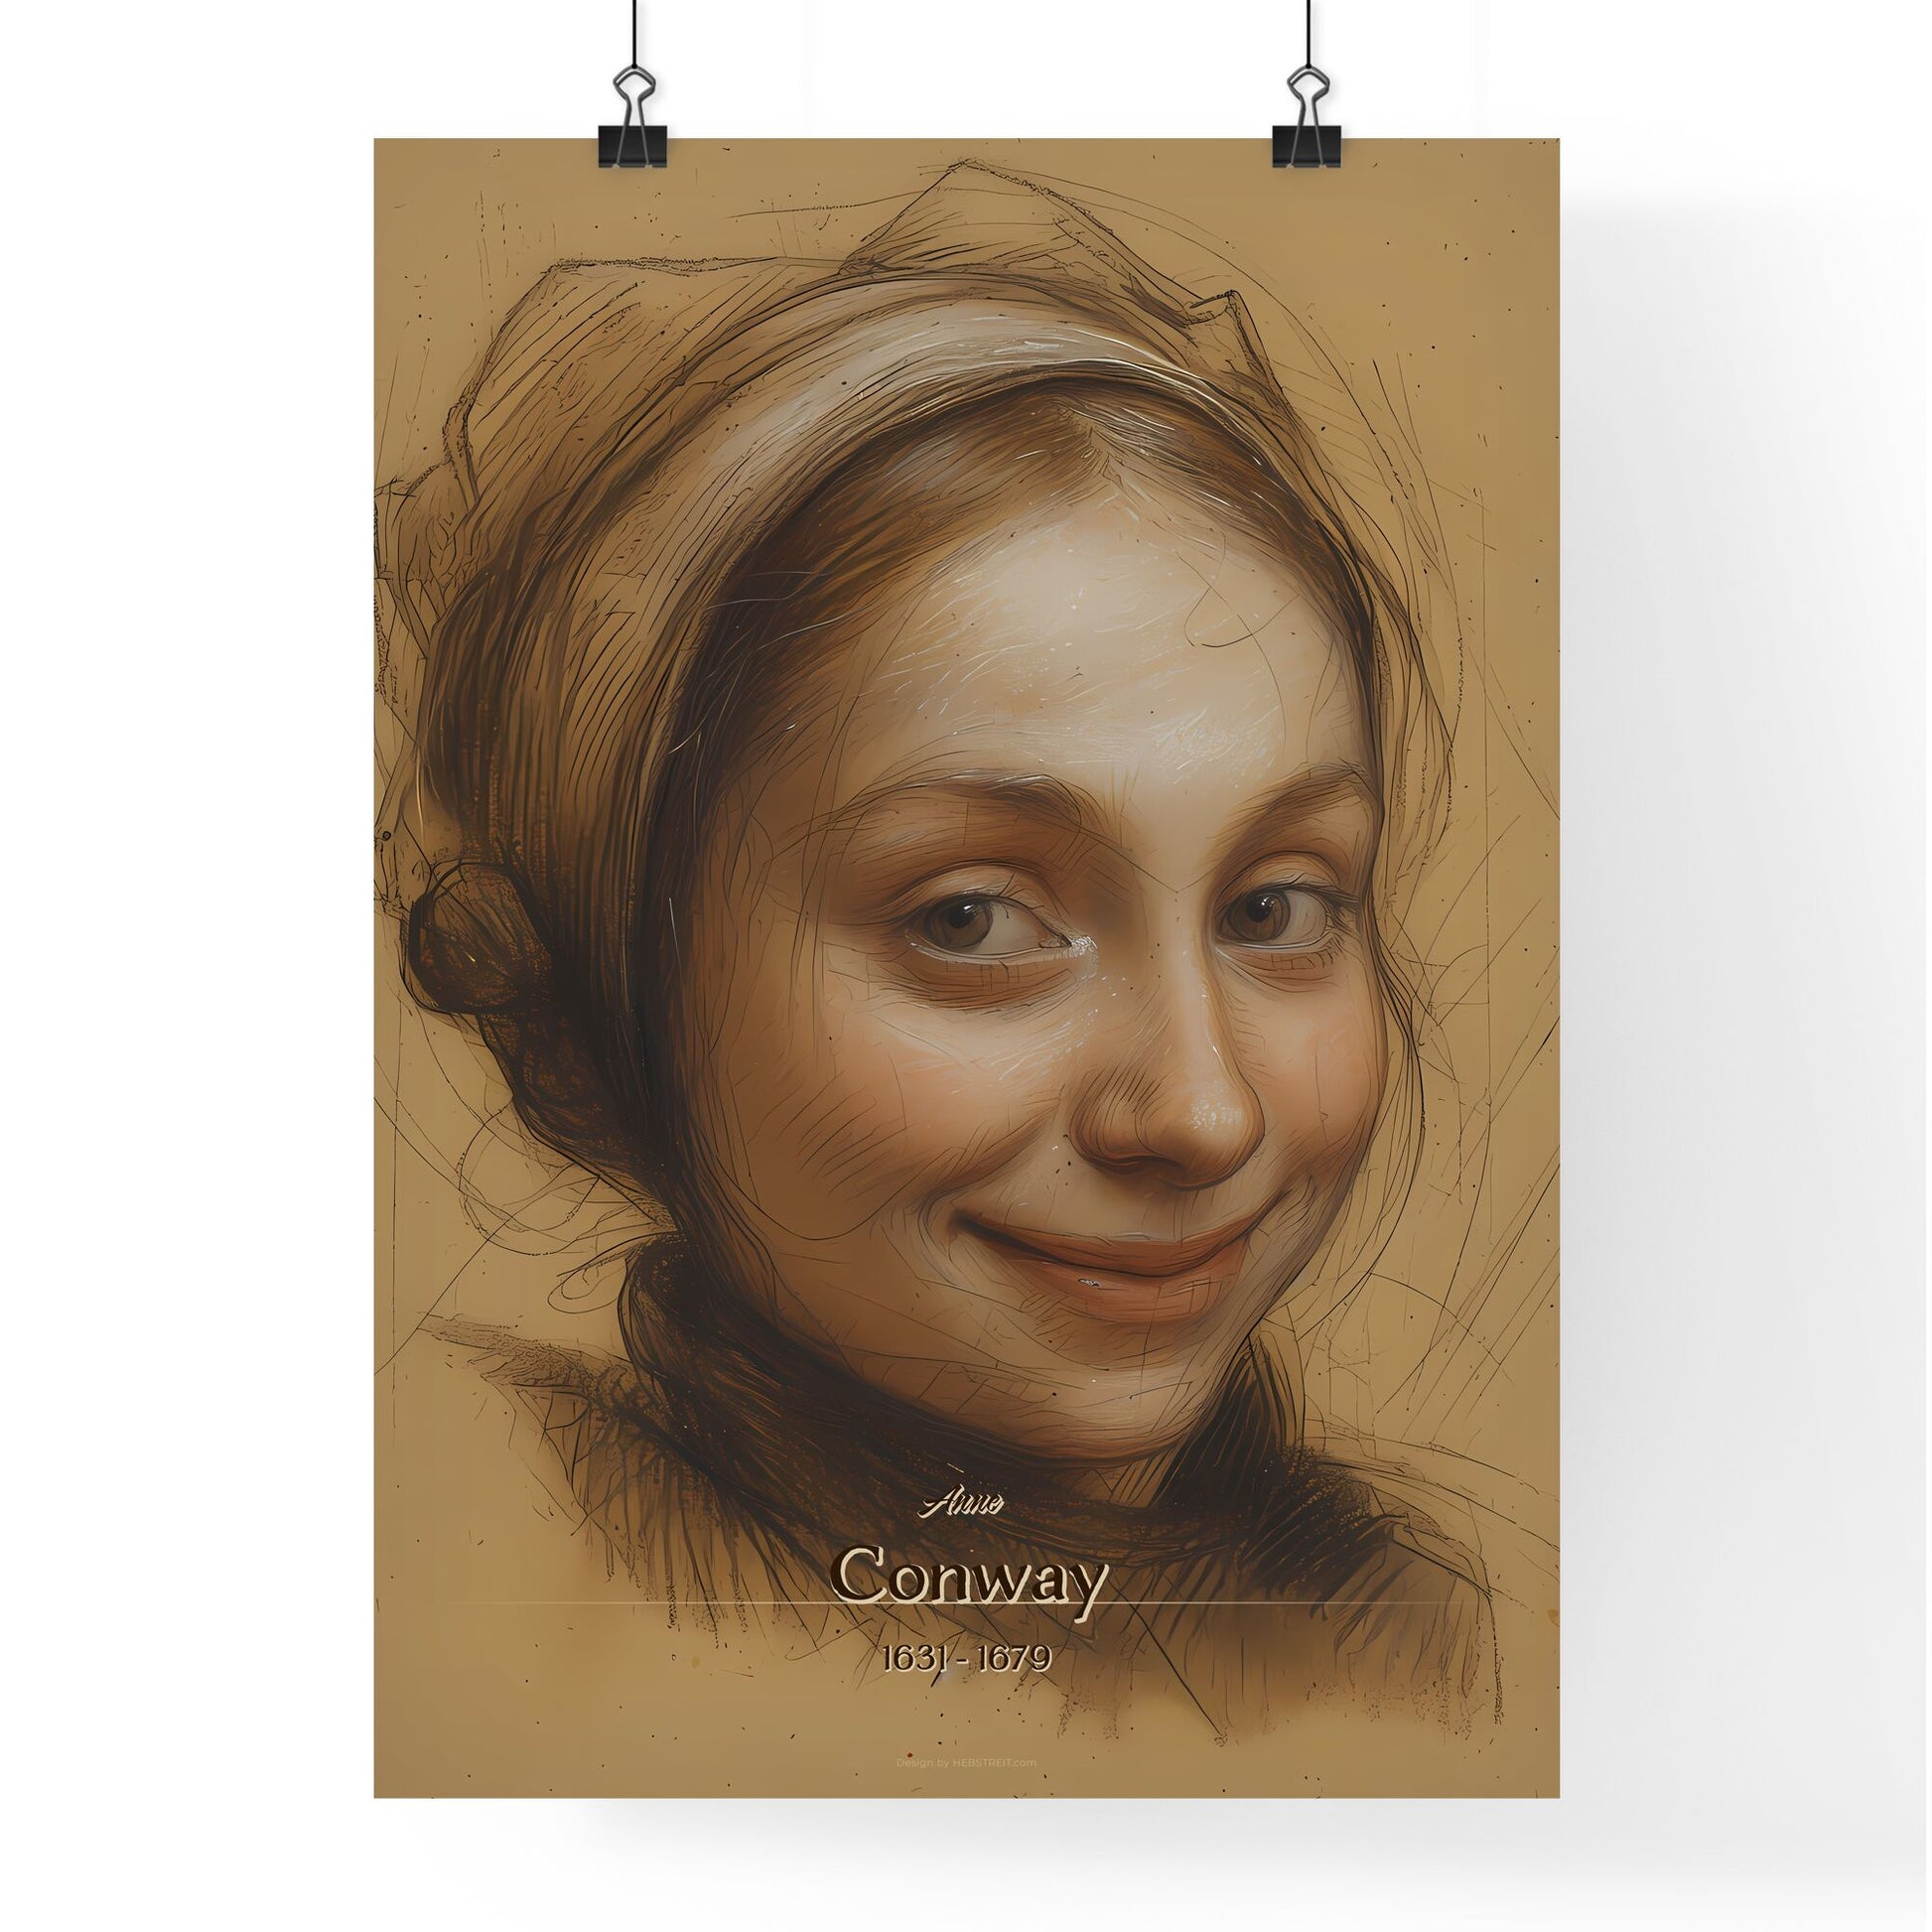 Anne, Conway, 1631 - 1679, A Poster of a drawing of a woman smiling Default Title